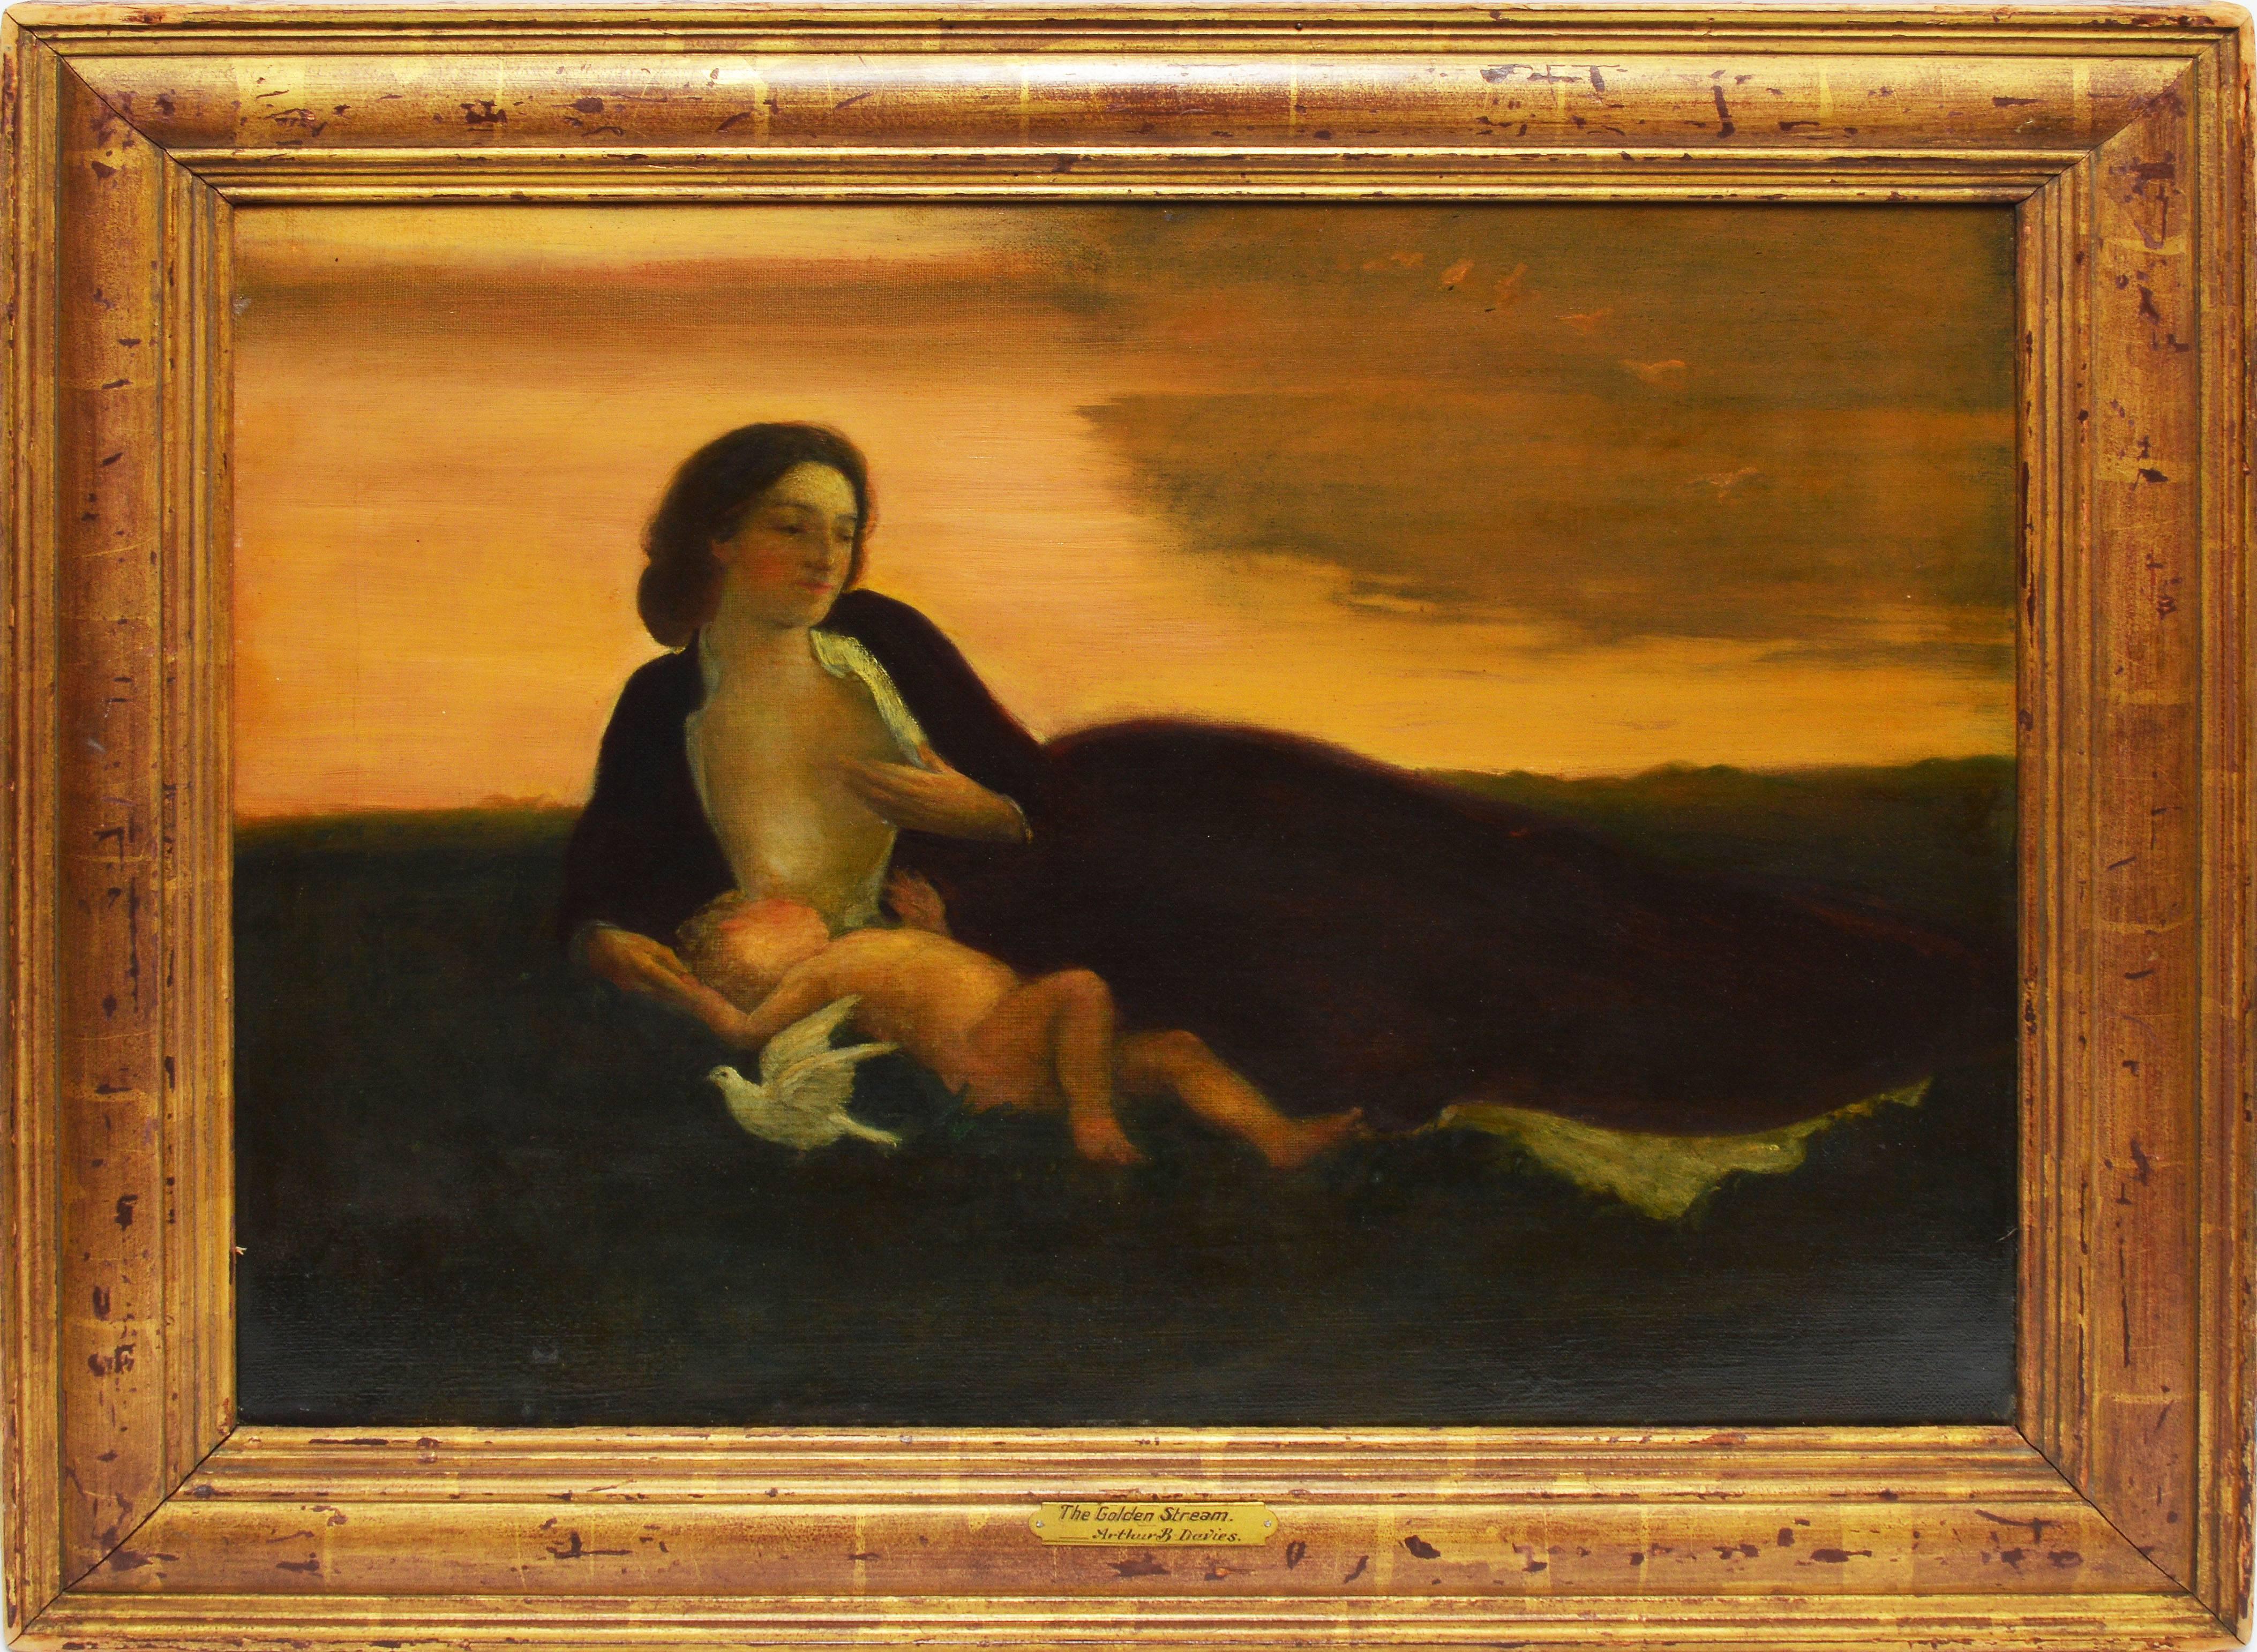 Modernist sunset landscape with a mother and child by Arthur Bowen Davies  (1862 - 1928).  Oil on canvas, circa 1900.  Unsigned.  Displayed in a giltwood frame.  Provenance from the 1913 Armory Show, James Michener Art Museum.  Image size, 22"L x